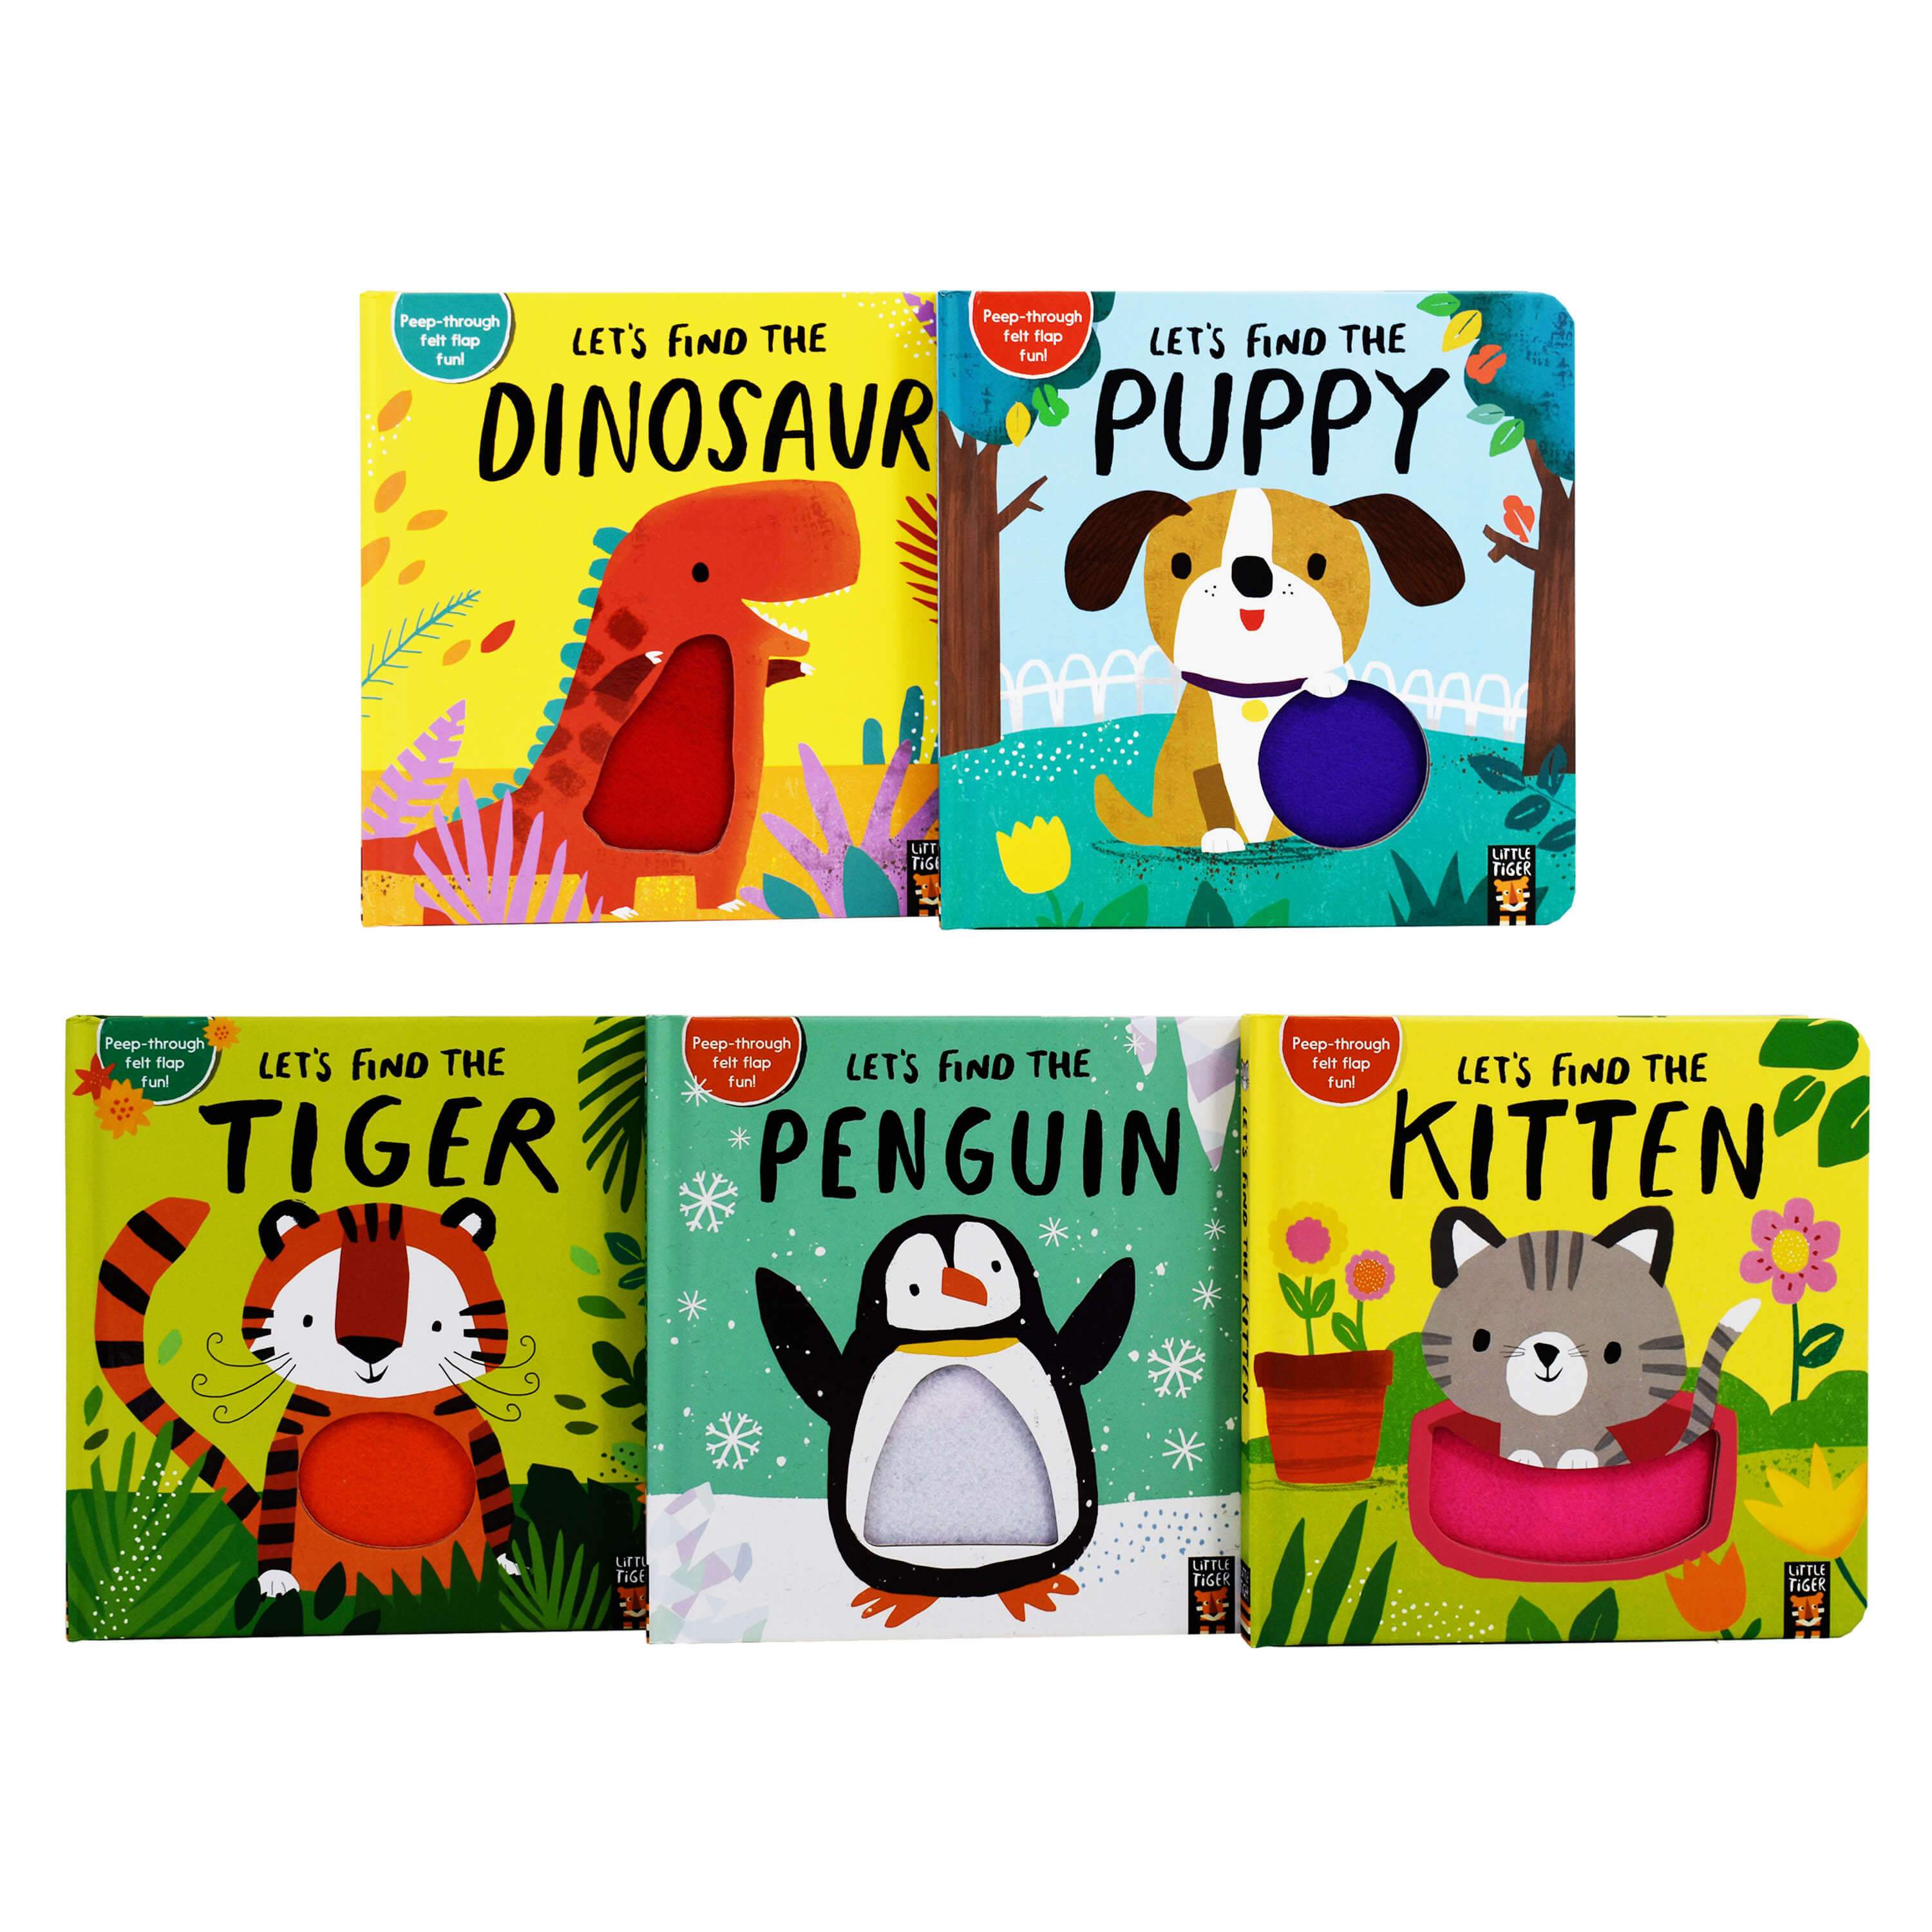 Age 0-5 - Lets Find The Animals 5 Books Box Set - Ages 0-5 - Board Books - Little Tigers